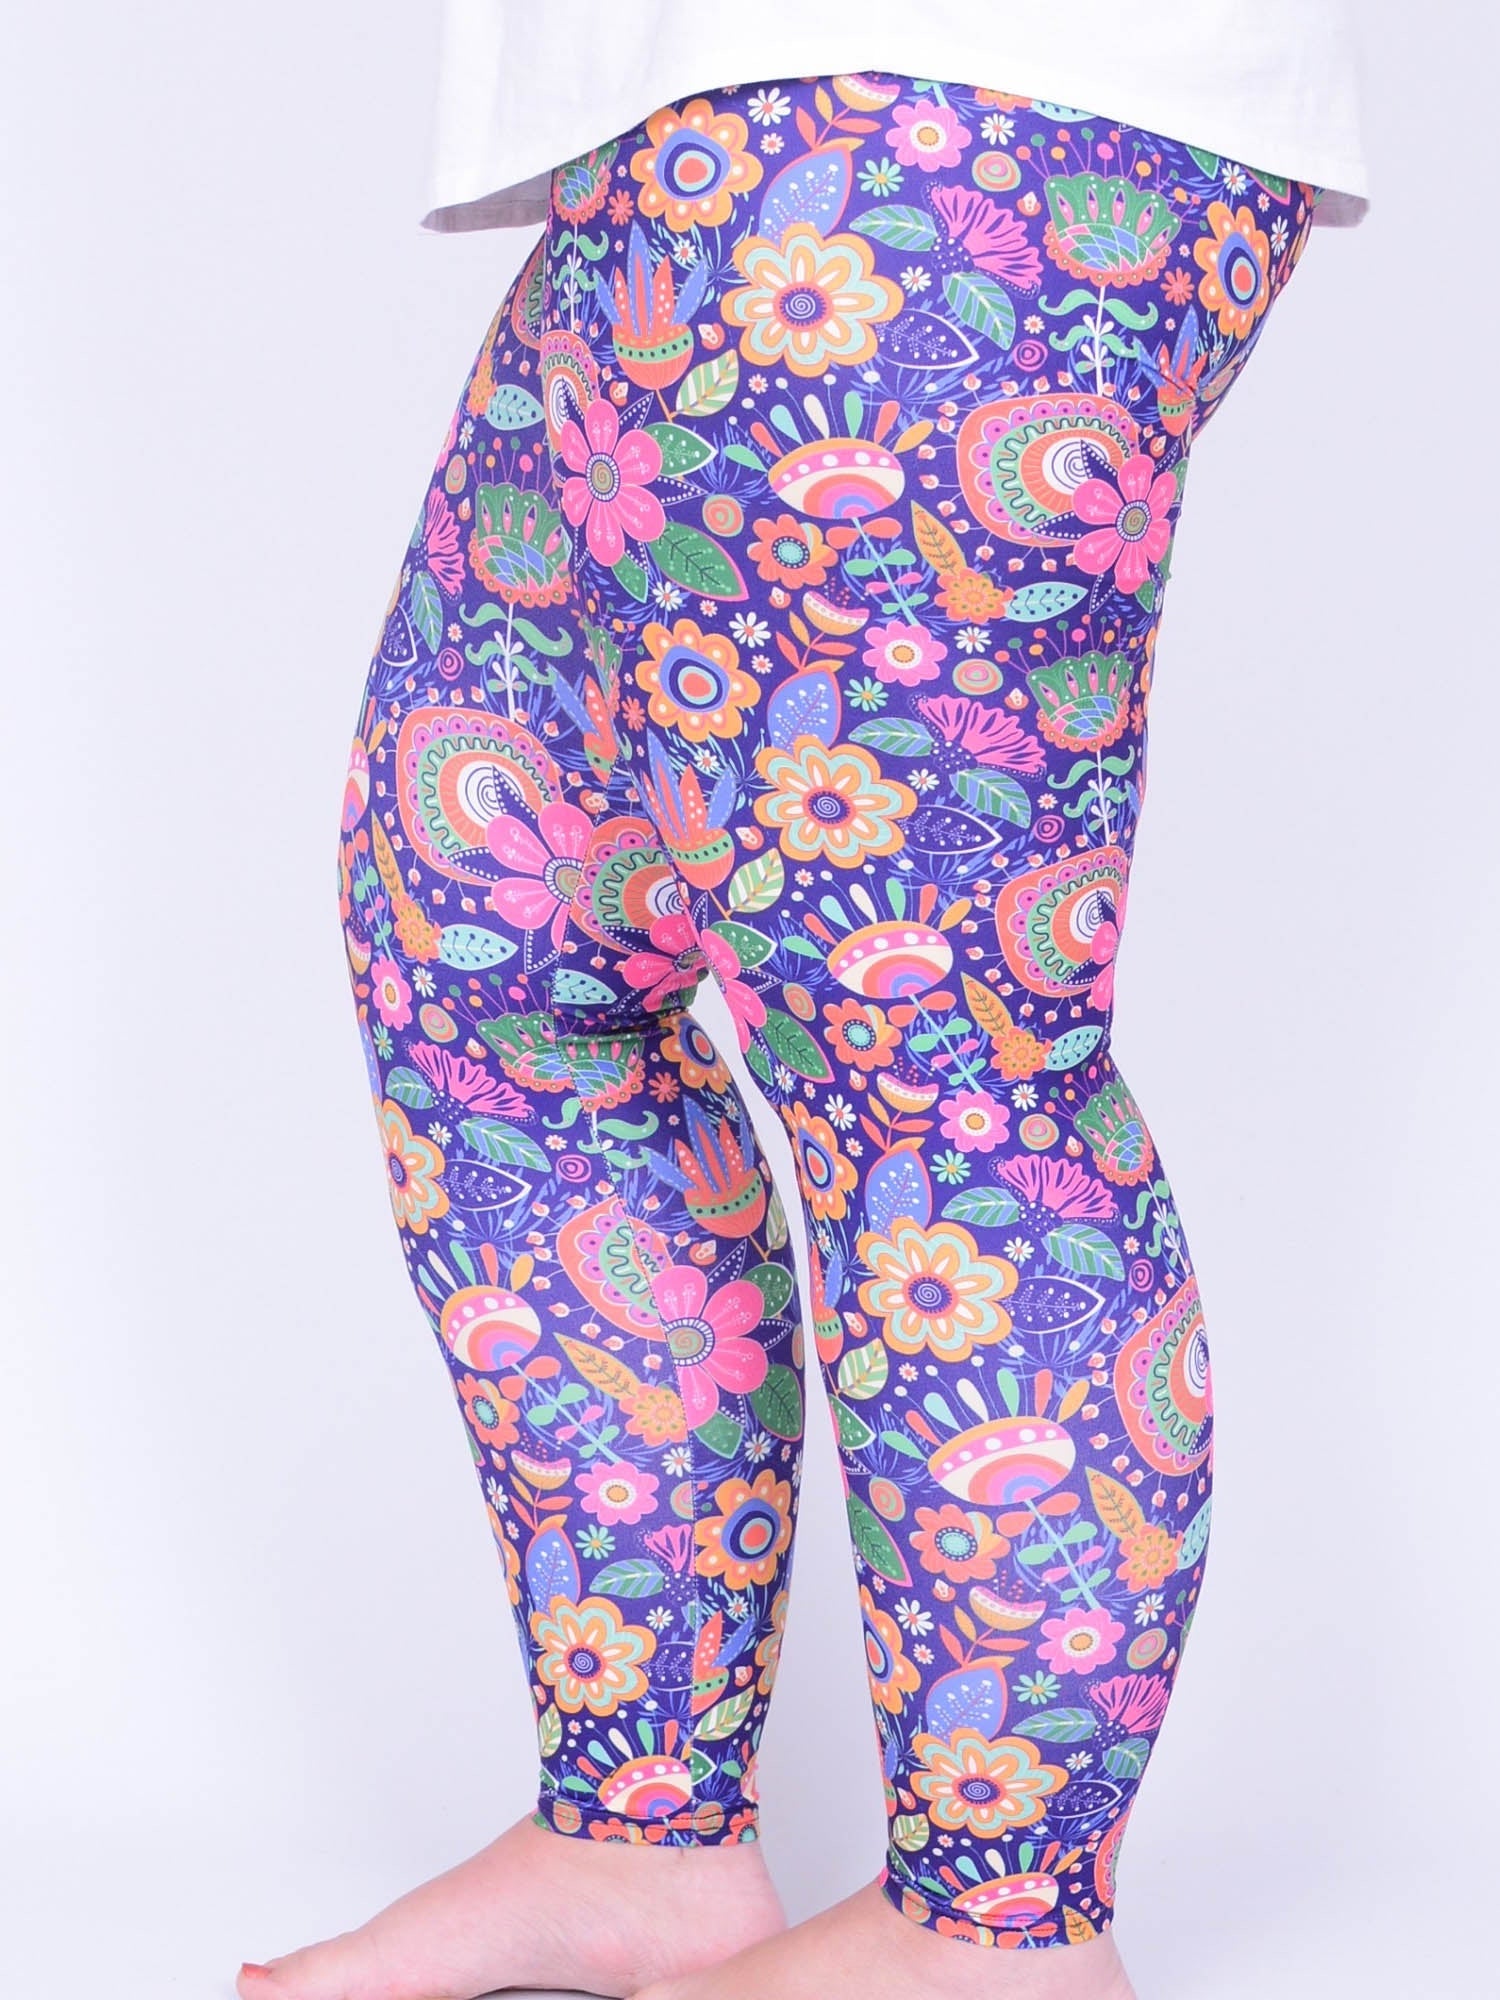 Leggings - Bright Floral - L9, Trousers, Pure Plus Clothing, Lagenlook Clothing, Plus Size Fashion, Over 50 Fashion